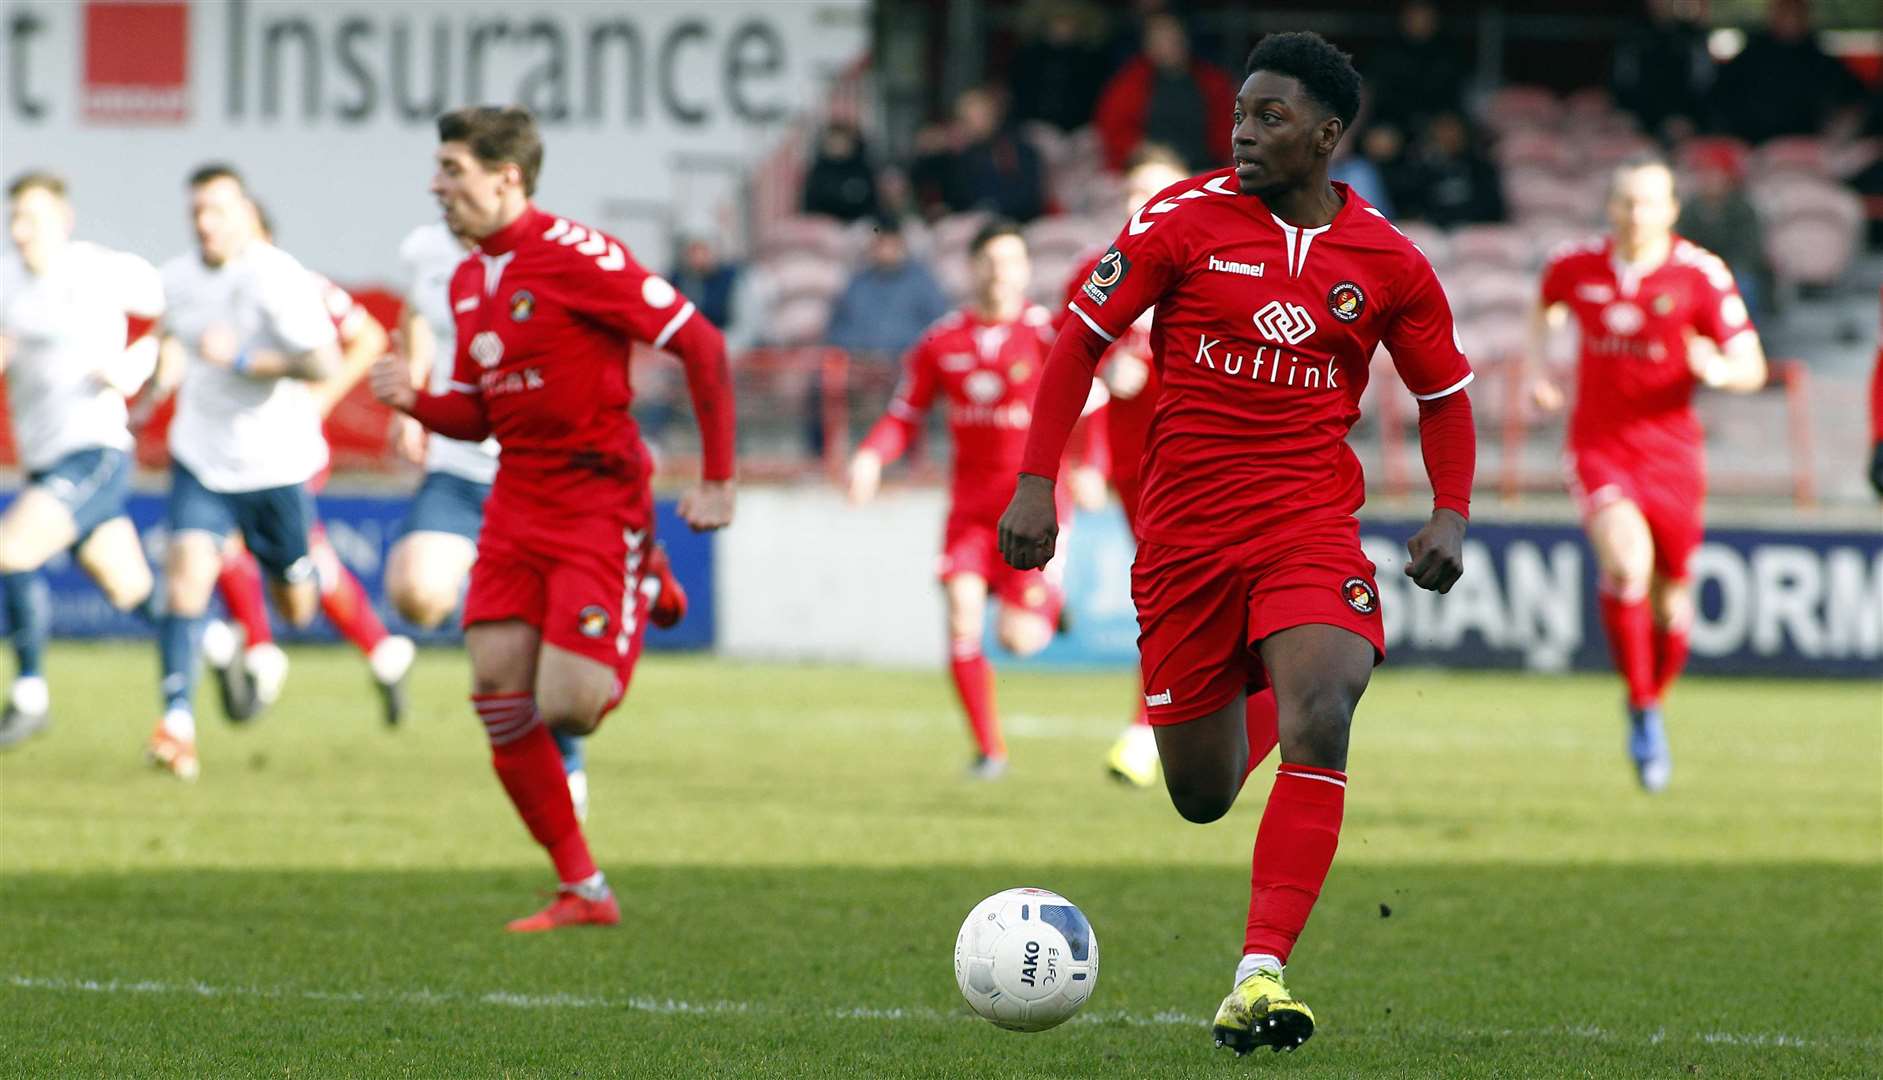 Ebbsfleet United in action against Stockport County Picture: Sean Aidan